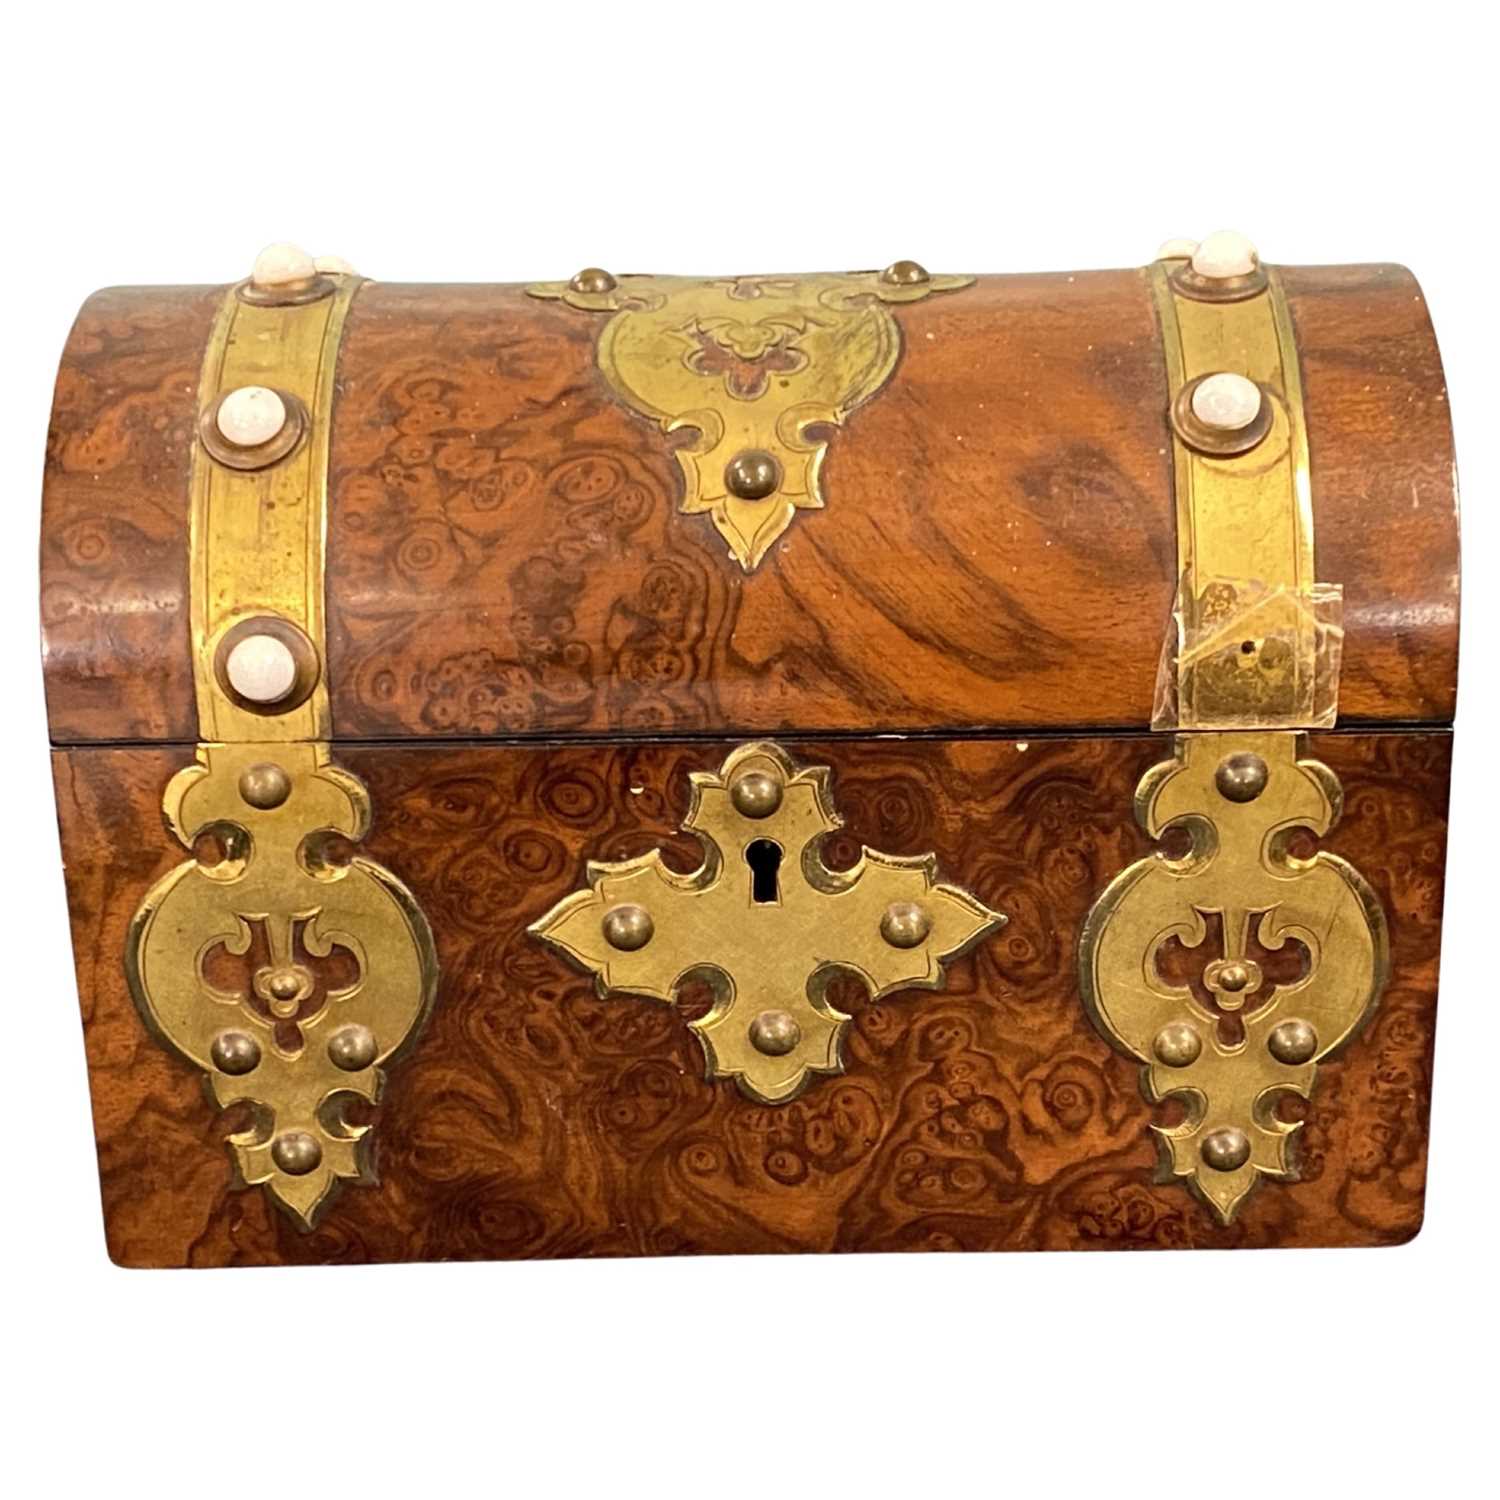 Late 19th Century wooden stationery box with domed cover and inlaid brass decoration, 20cm long